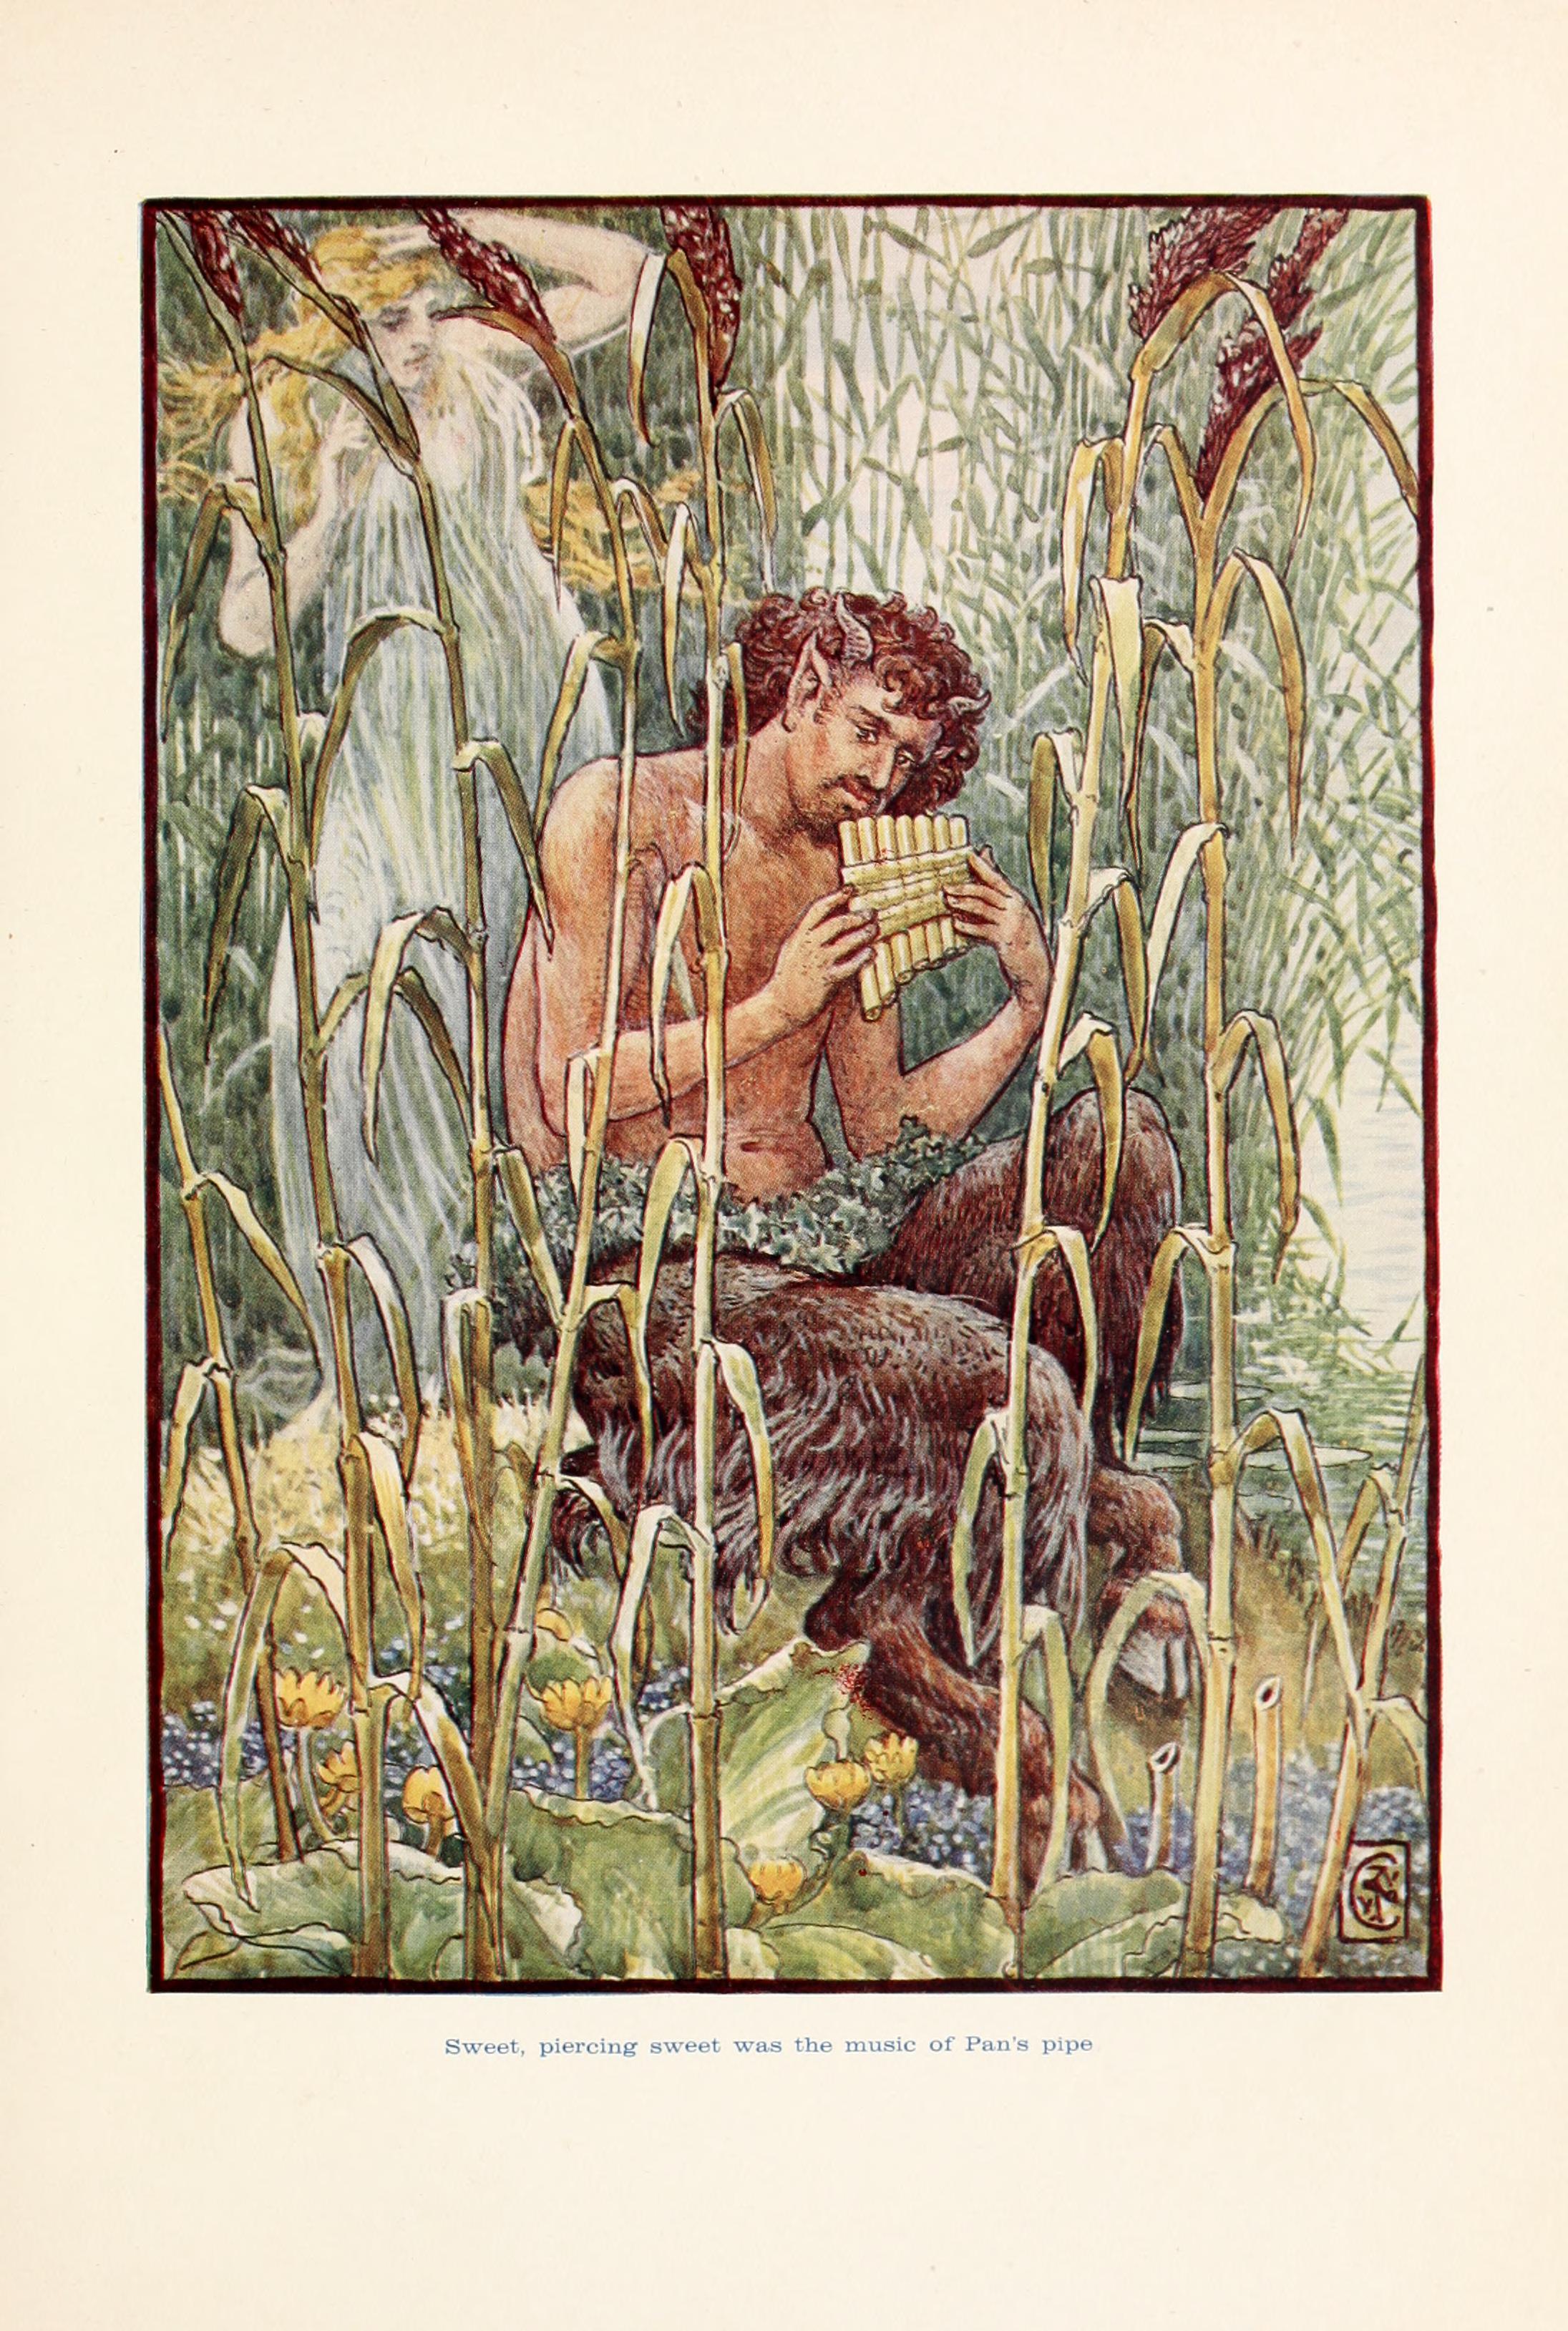 illustration of pan, a man with a flute, hooves, and pointy ears with a nymph, a woman, in the background